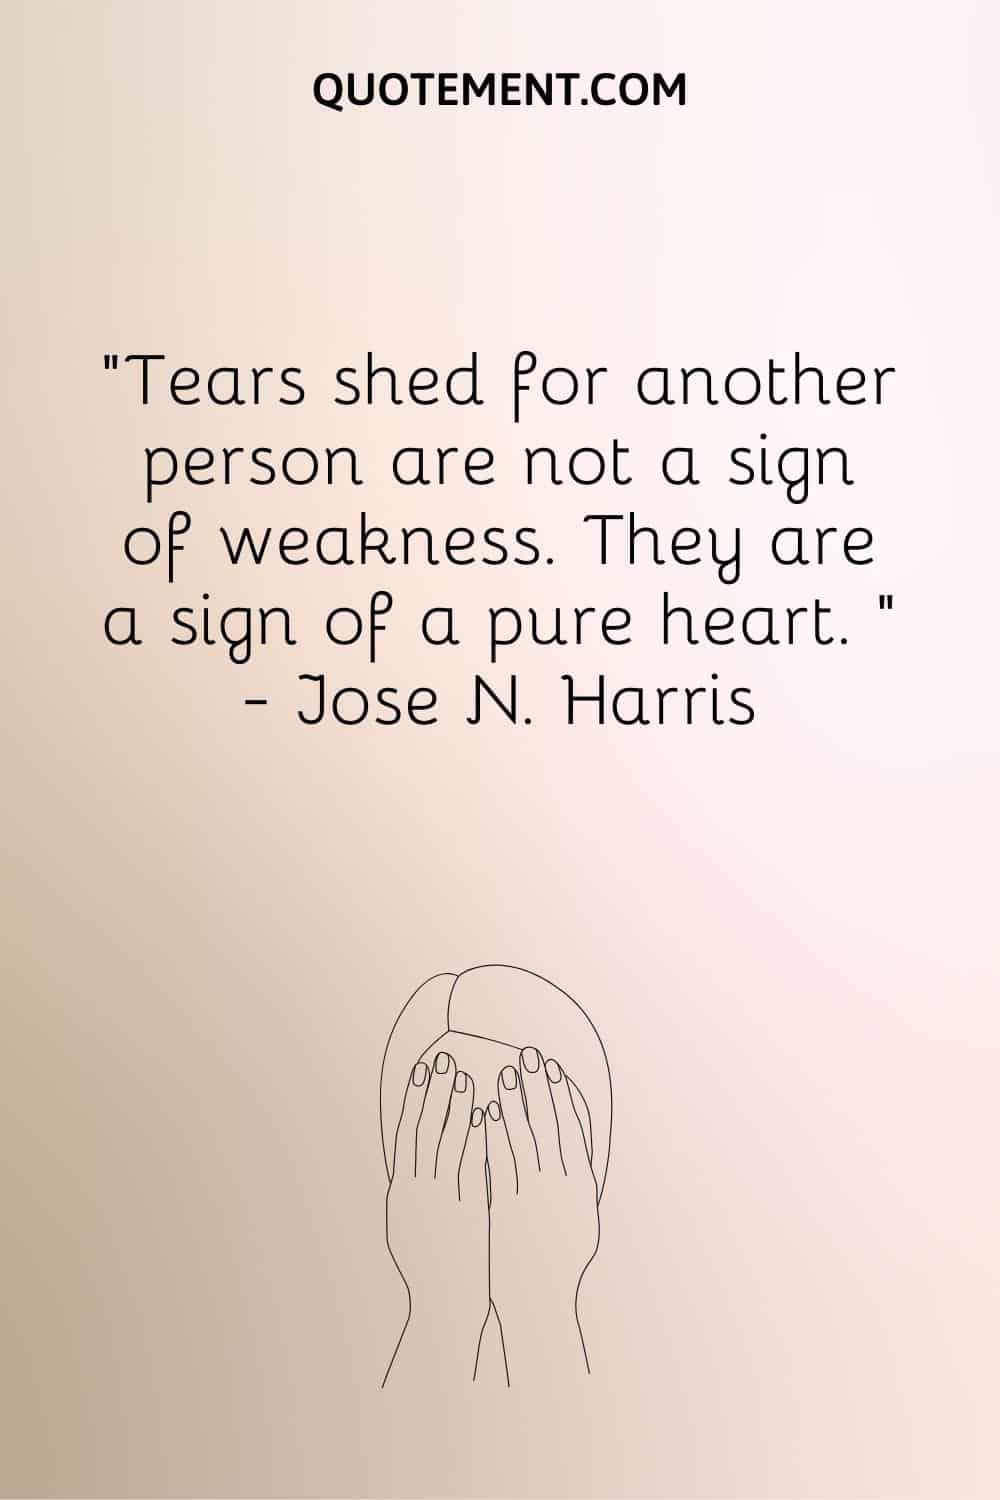 Tears shed for another person are not a sign of weakness. They are a sign of a pure heart